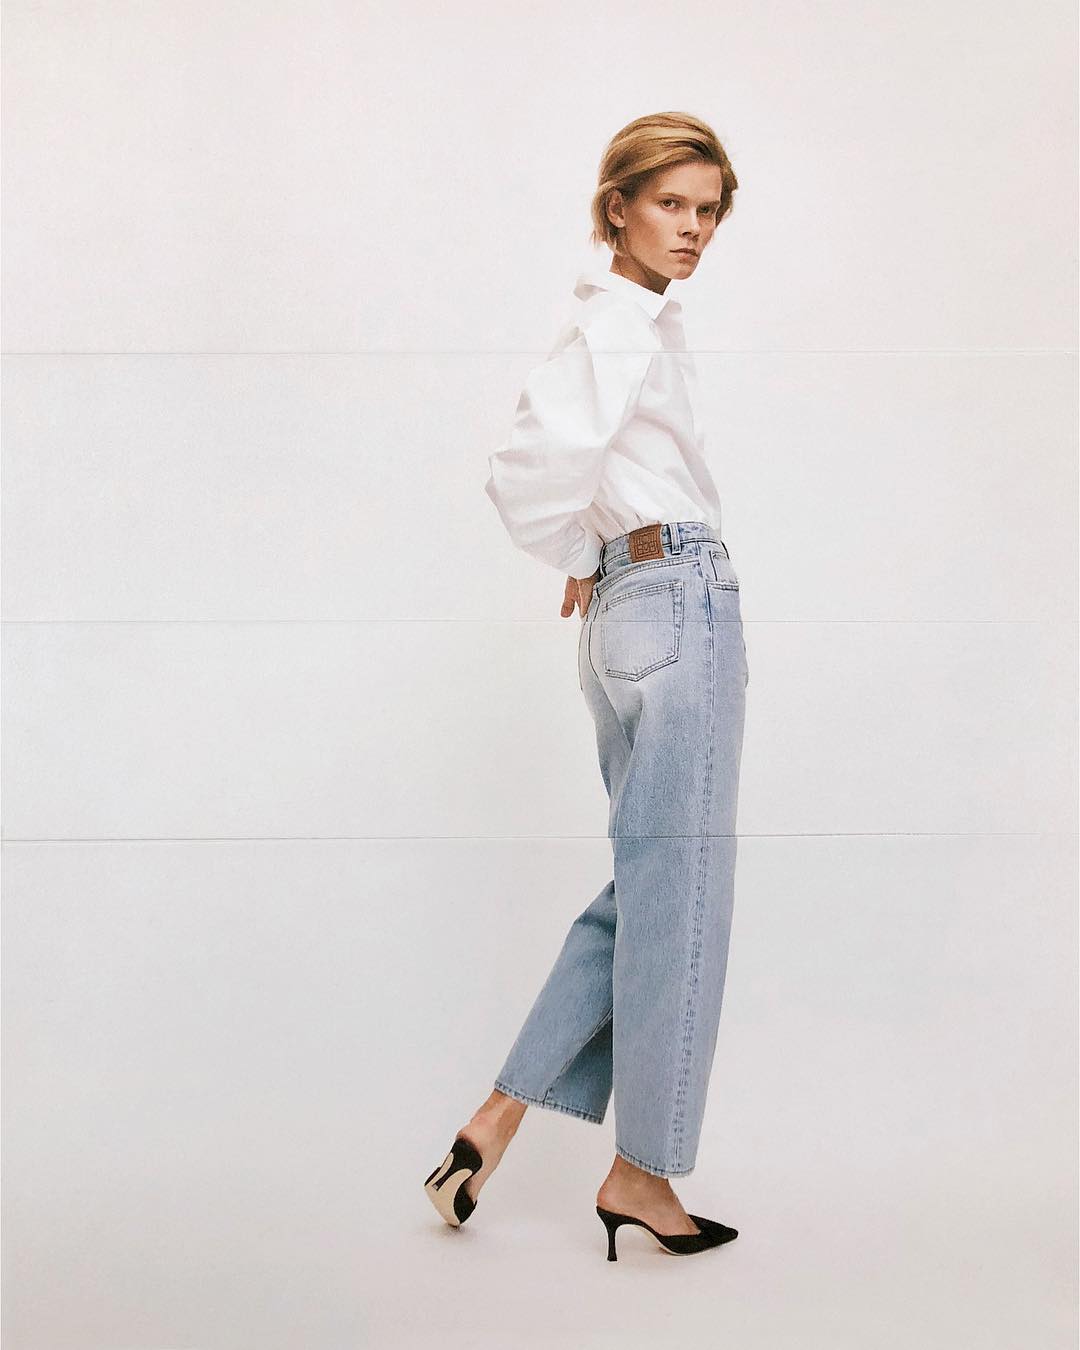 Simple Chic Fall Look Idea — White, Shirt, Jeans, Mule Heels